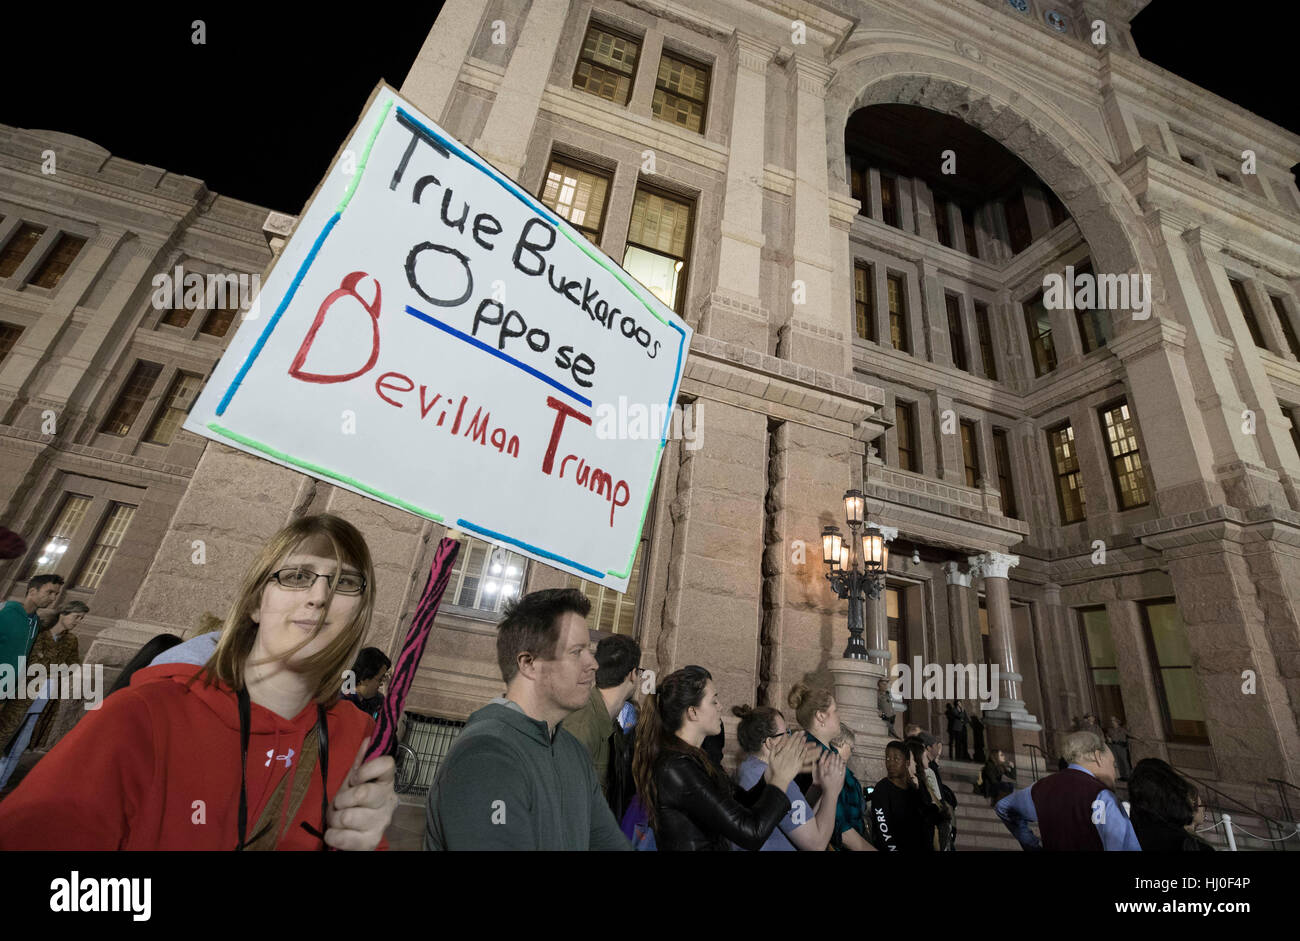 Austin, USA. 21st Jan, 2017. Austin, Texas USA Jan. 20, 2017: Thousands of LGBTQ Texans rally at the Texas Capitol protesting the inauguration of Donald Trump as 45th President of the United States. The event, one of many in Texas Friday, mirrored dozens nationwide with no arrests reported. Credit: Bob Daemmrich/Alamy Live News Stock Photo